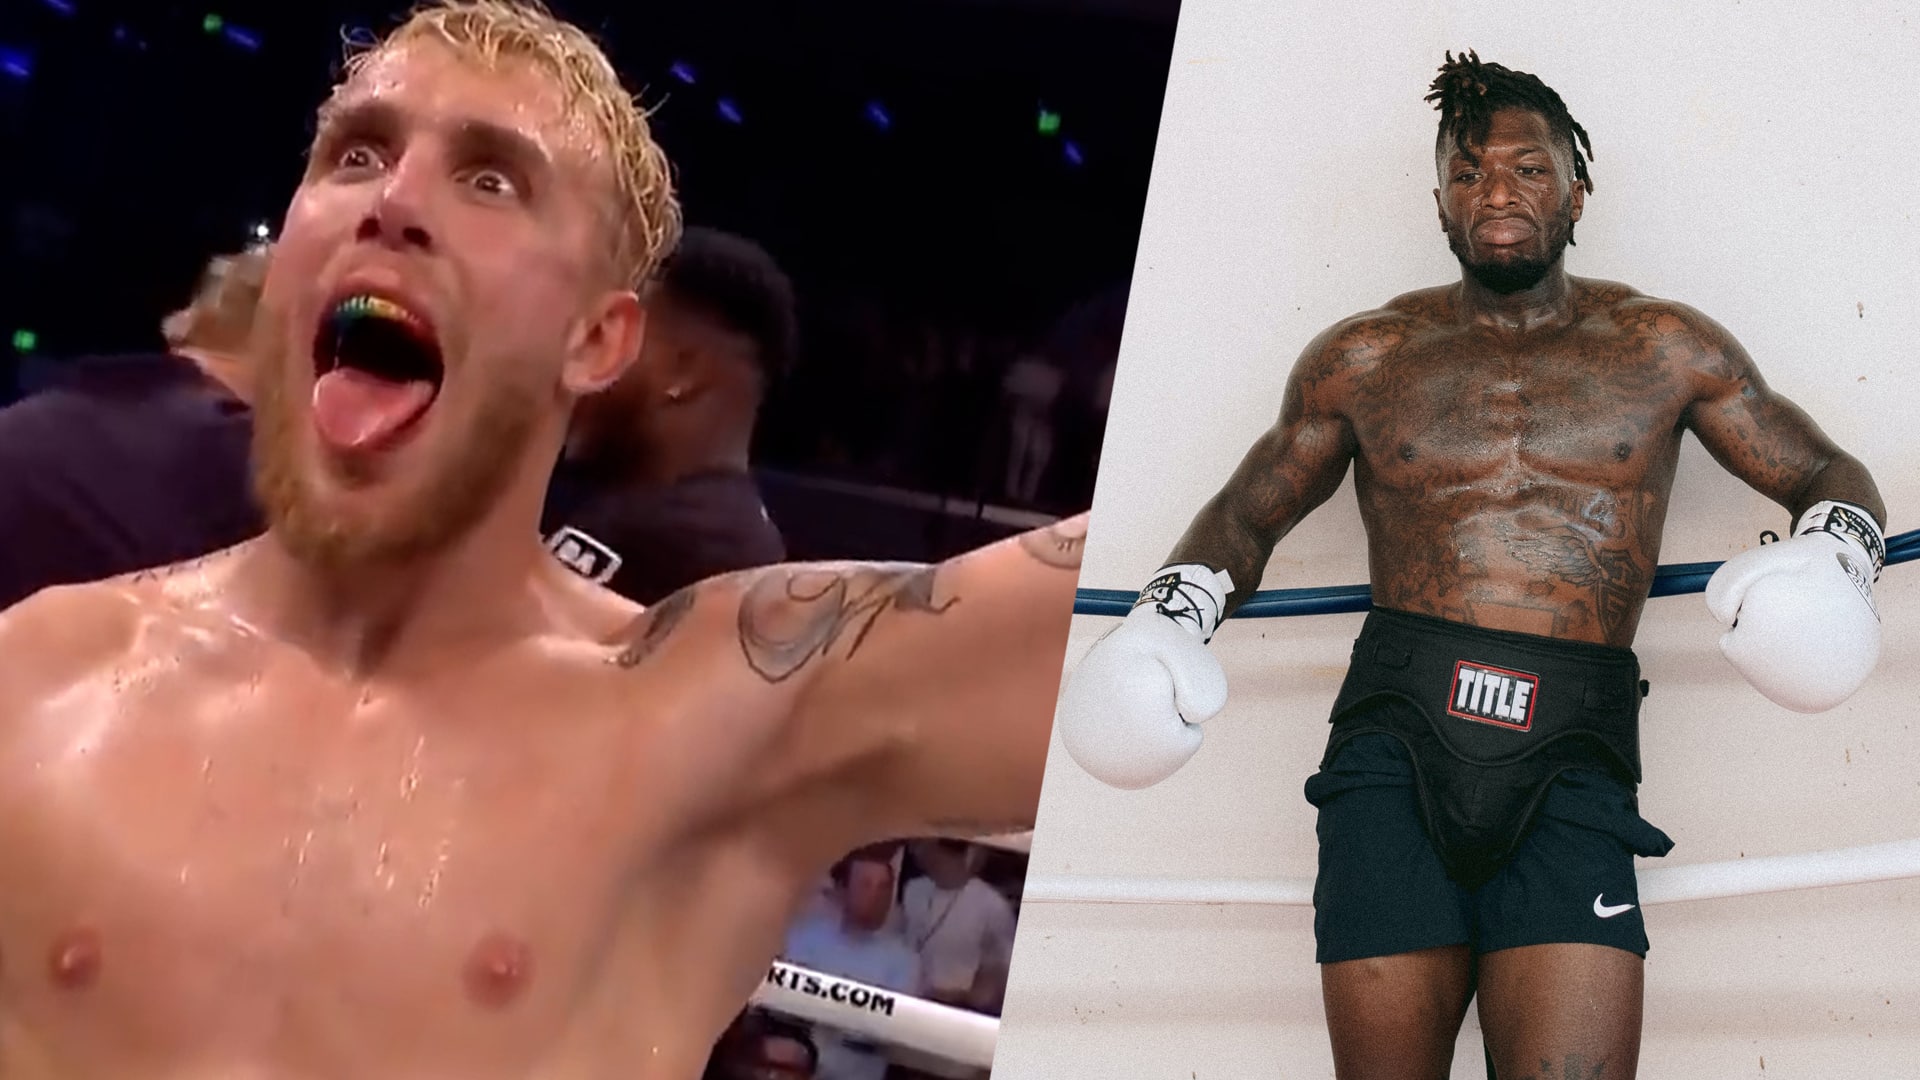 Jake Paul defeats former NBA star Nate Robinson in a boxing match